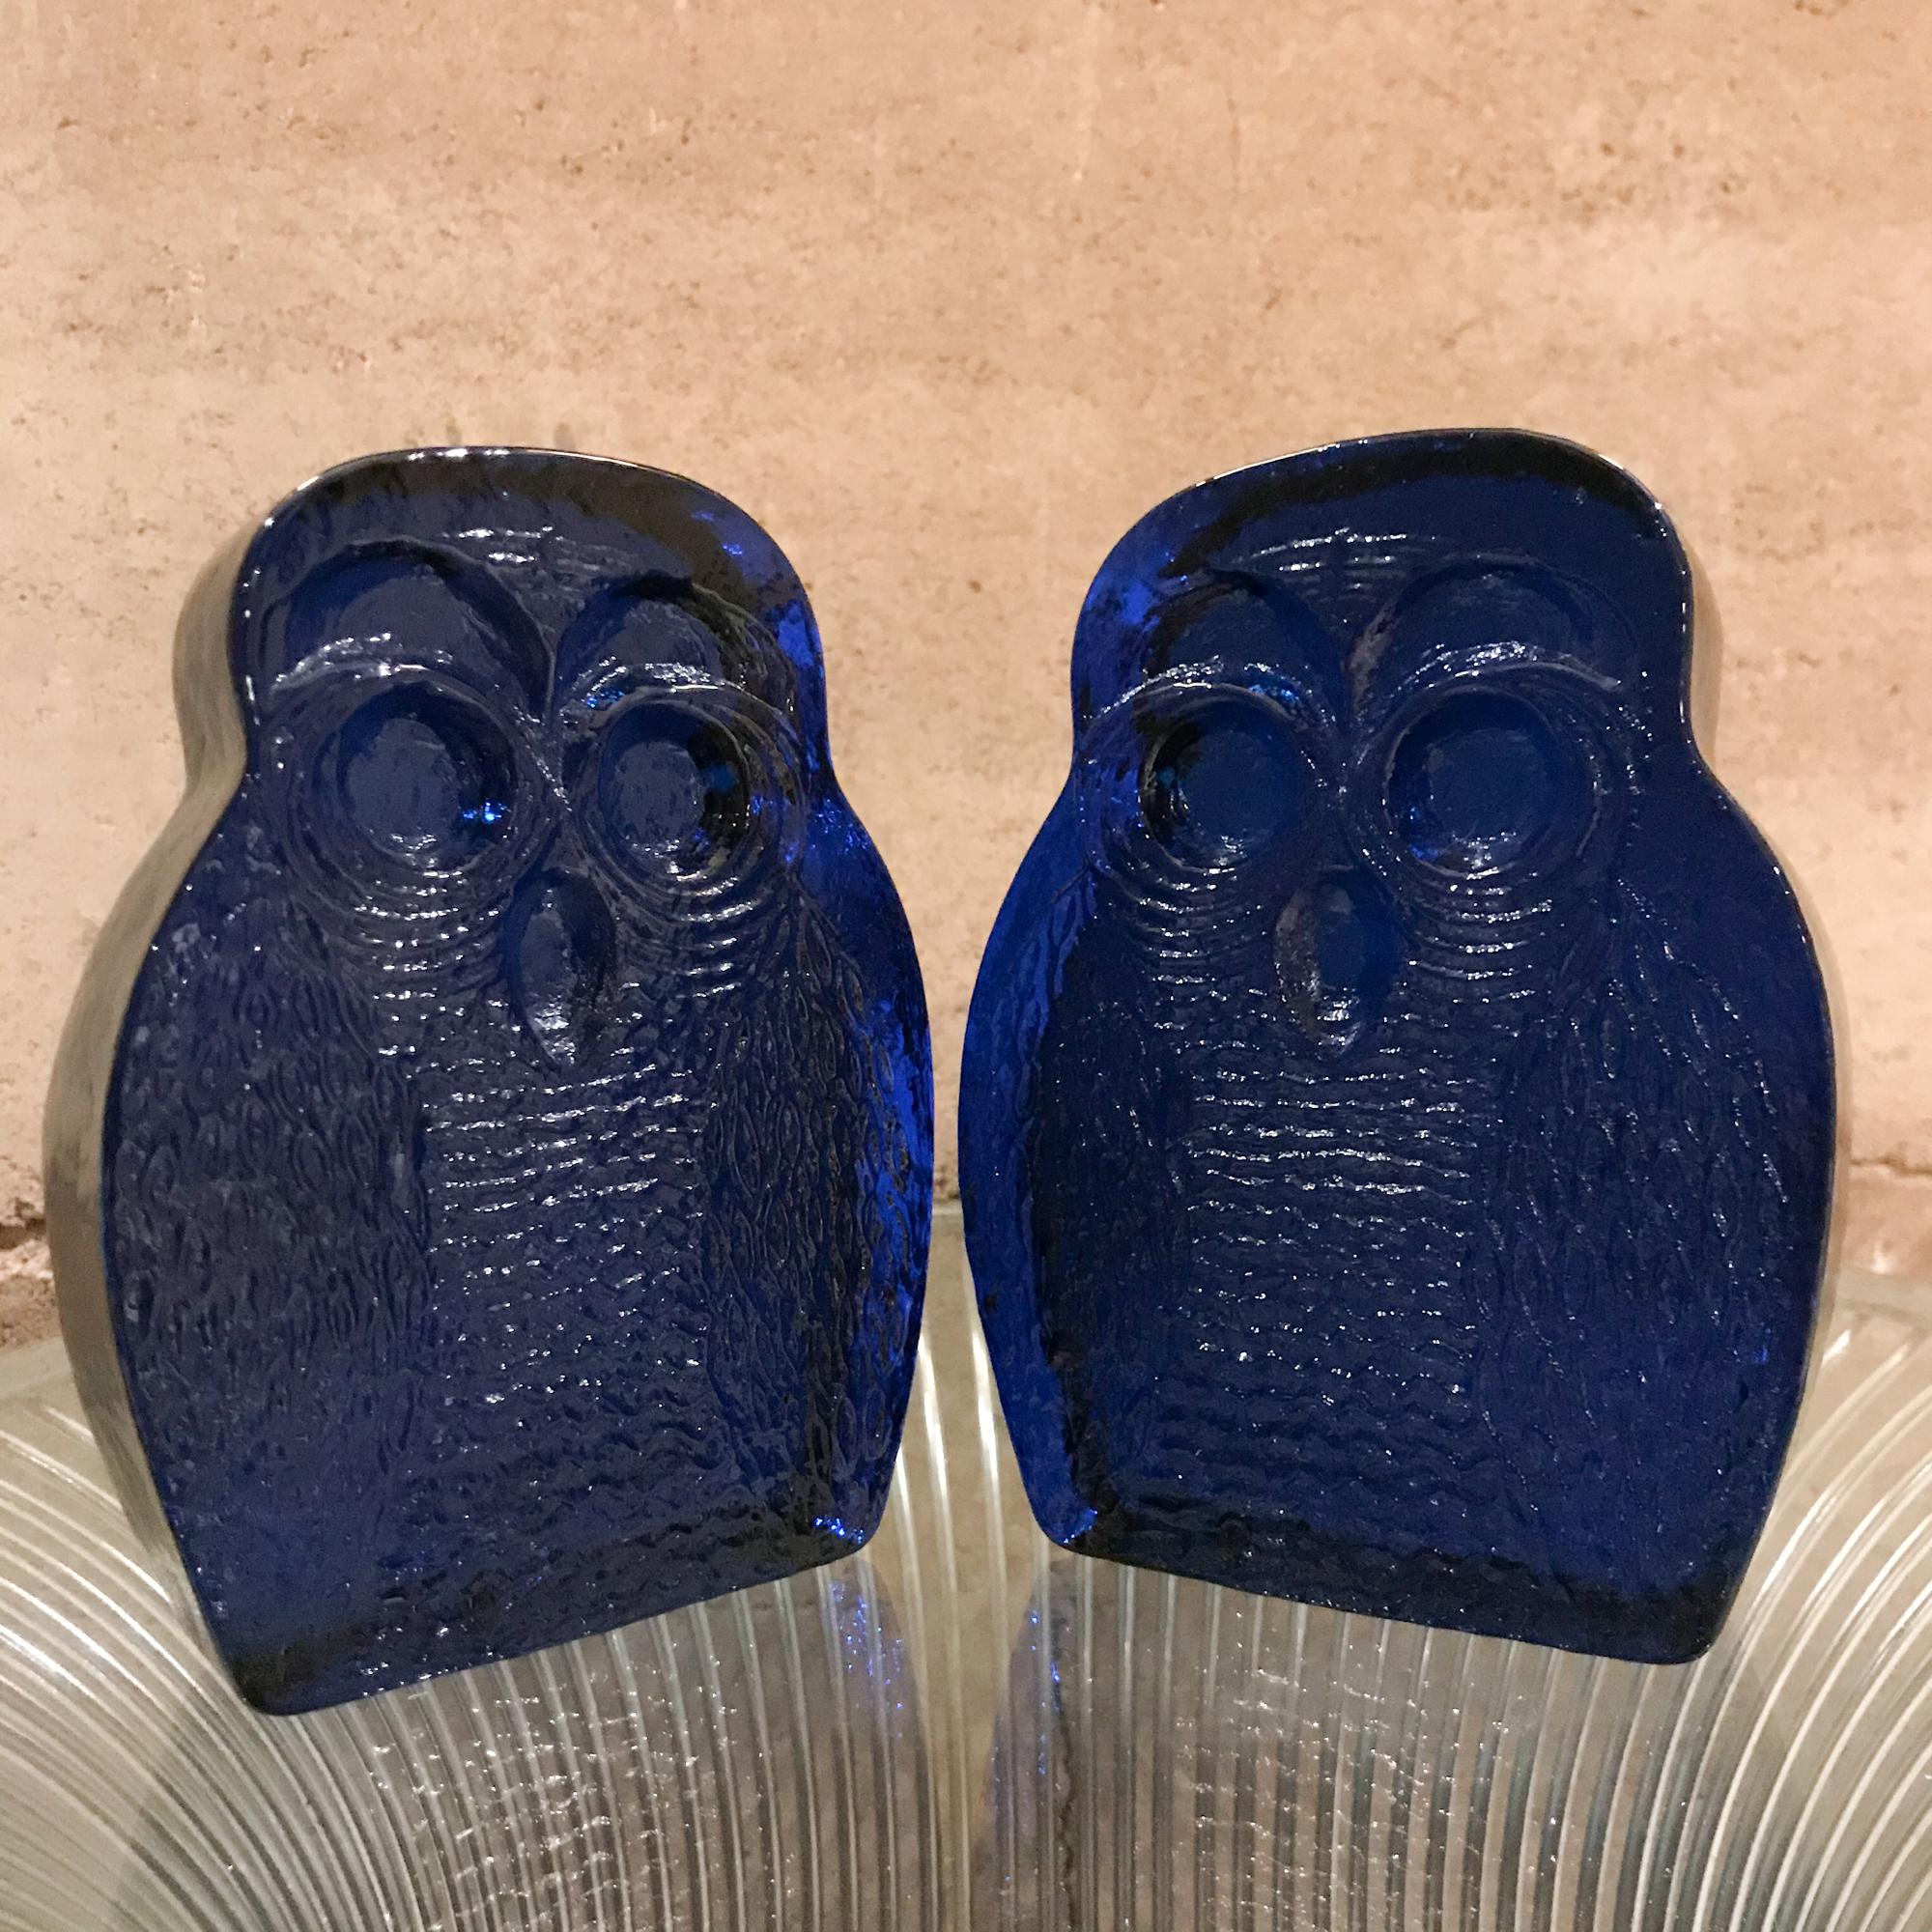 Bookends
Pair of Cobalt BLUE Handblown handcrafted Glass OWL Bookends by BLENKO of USA
Designed by Joel Myers for Blenko Milton WV
Unmarked.
6.75 + .13 x 5.5 W x 1.75 D
Original Preowned Unrestored Good Vintage Condition.
Refer to images shown. 